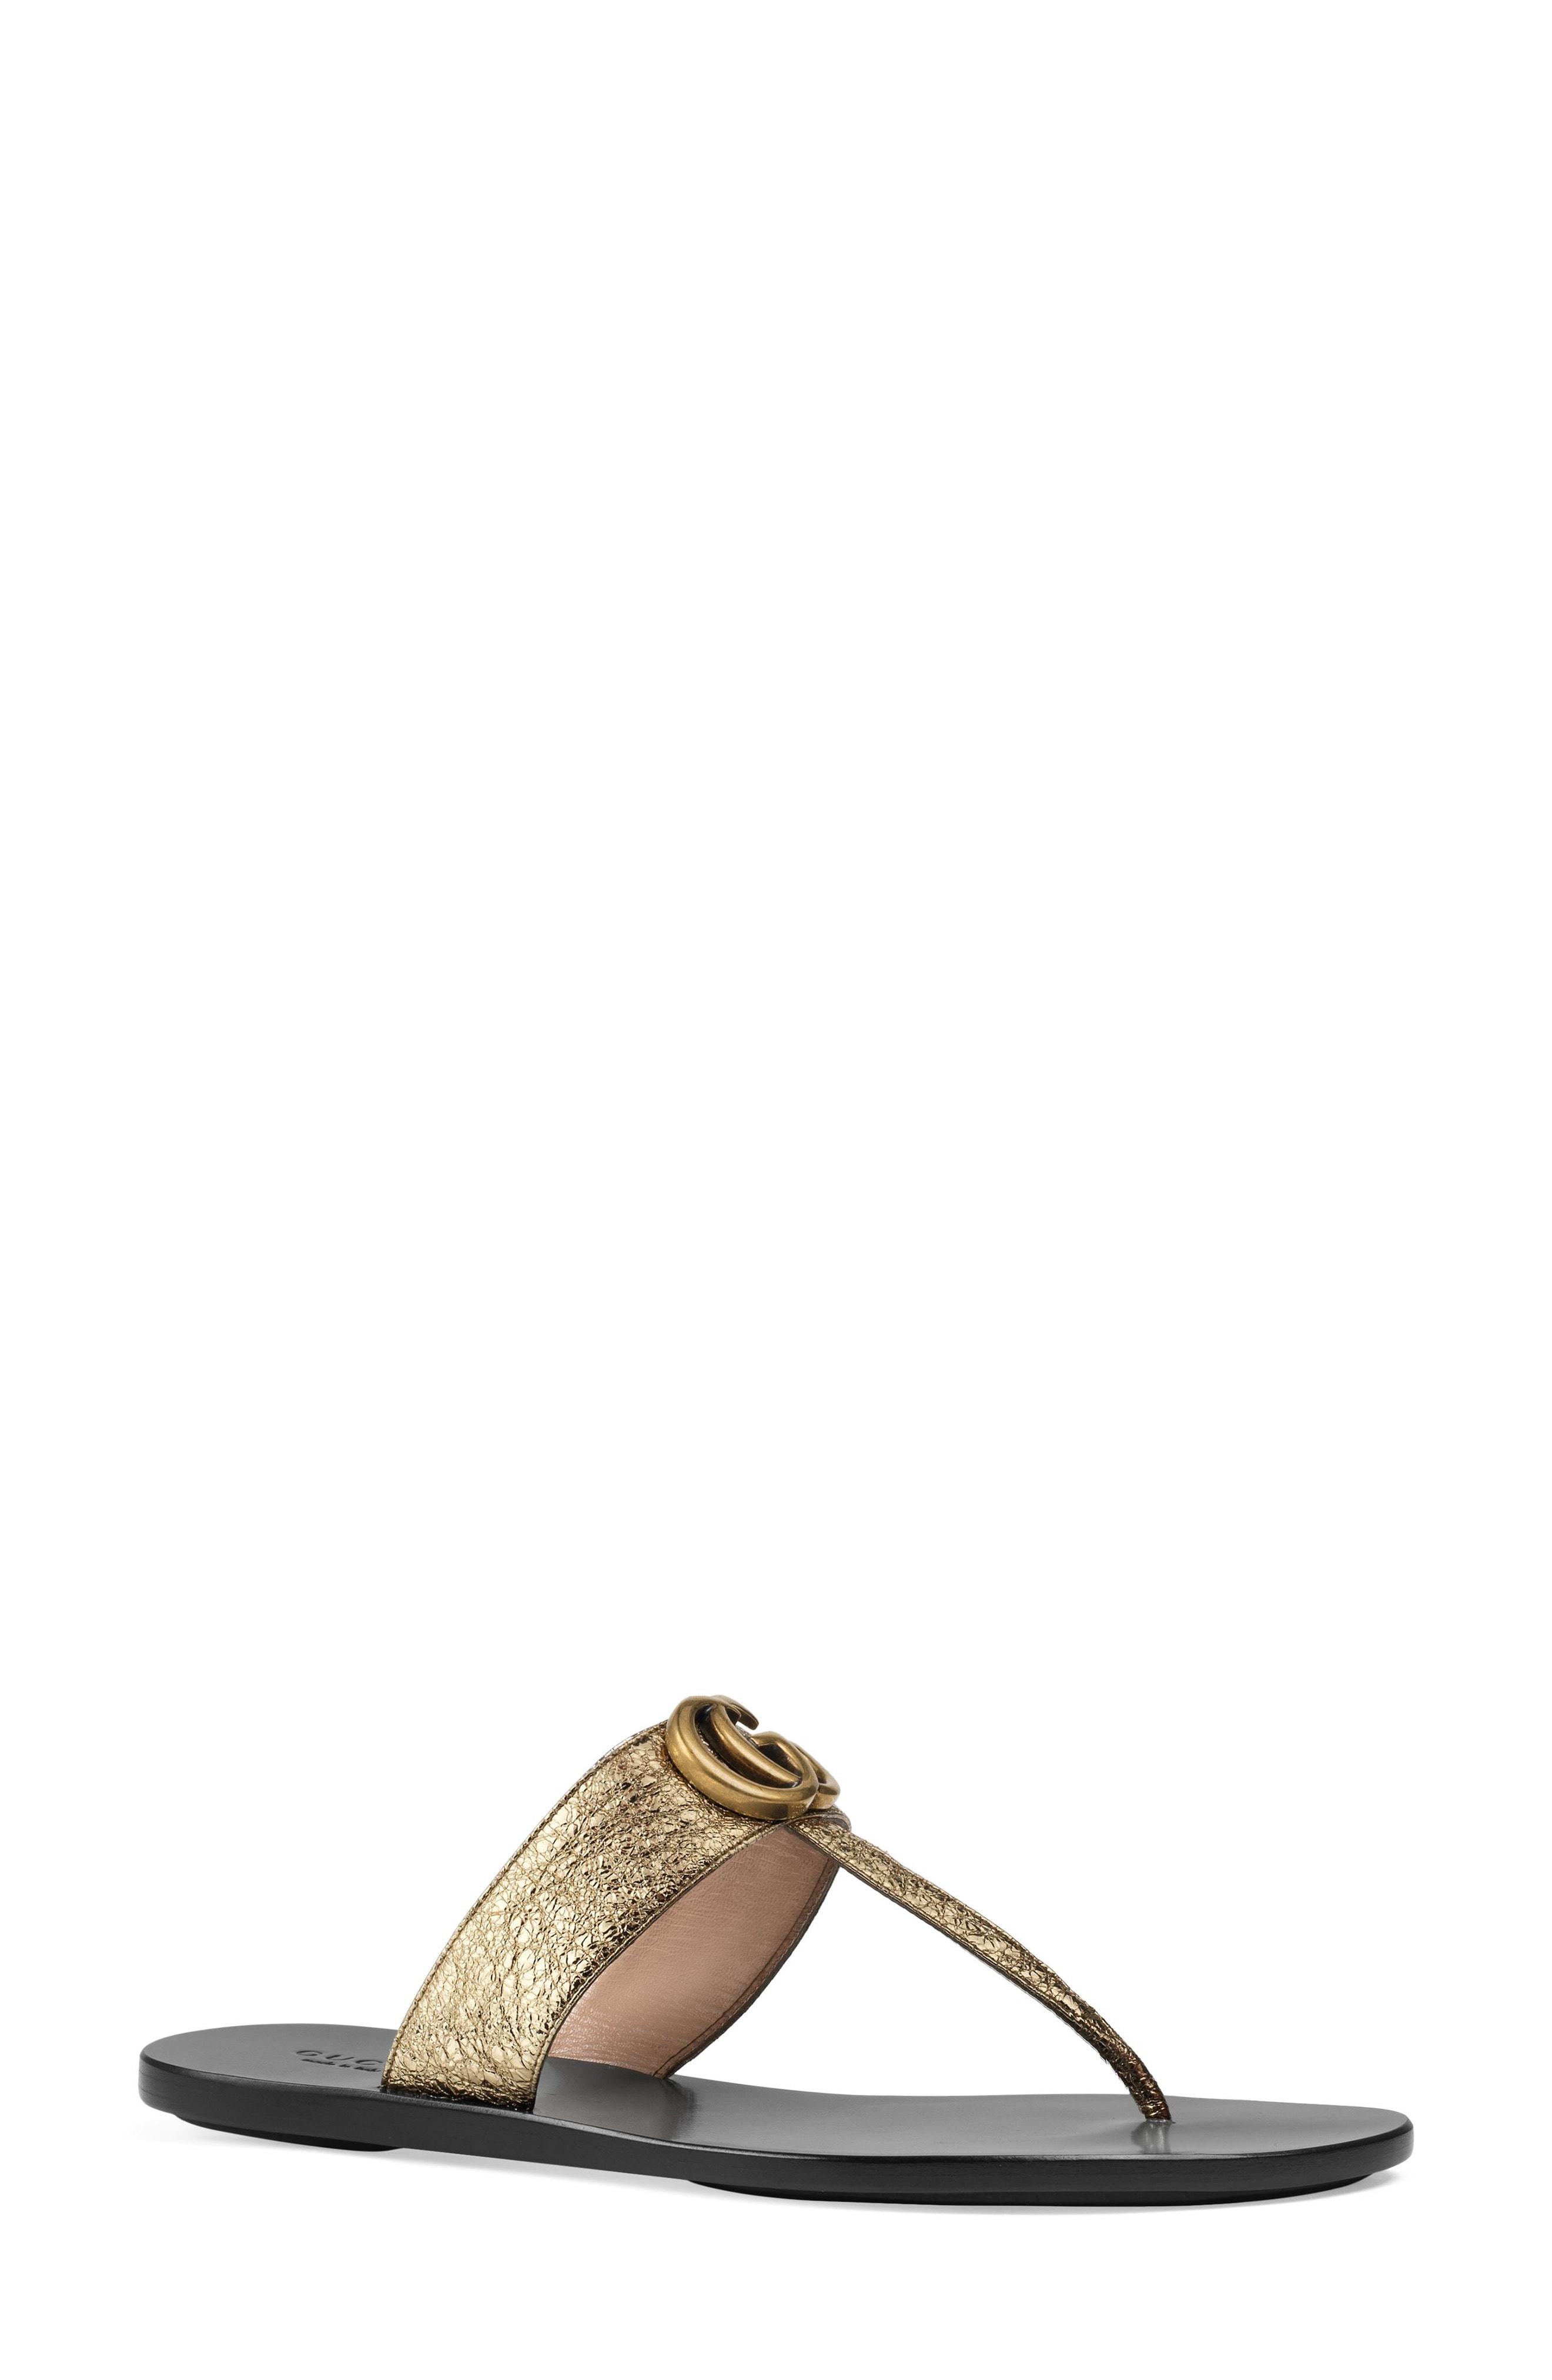 Gucci Marmont T Strap Sandal, $550 | Nordstrom | Lookastic